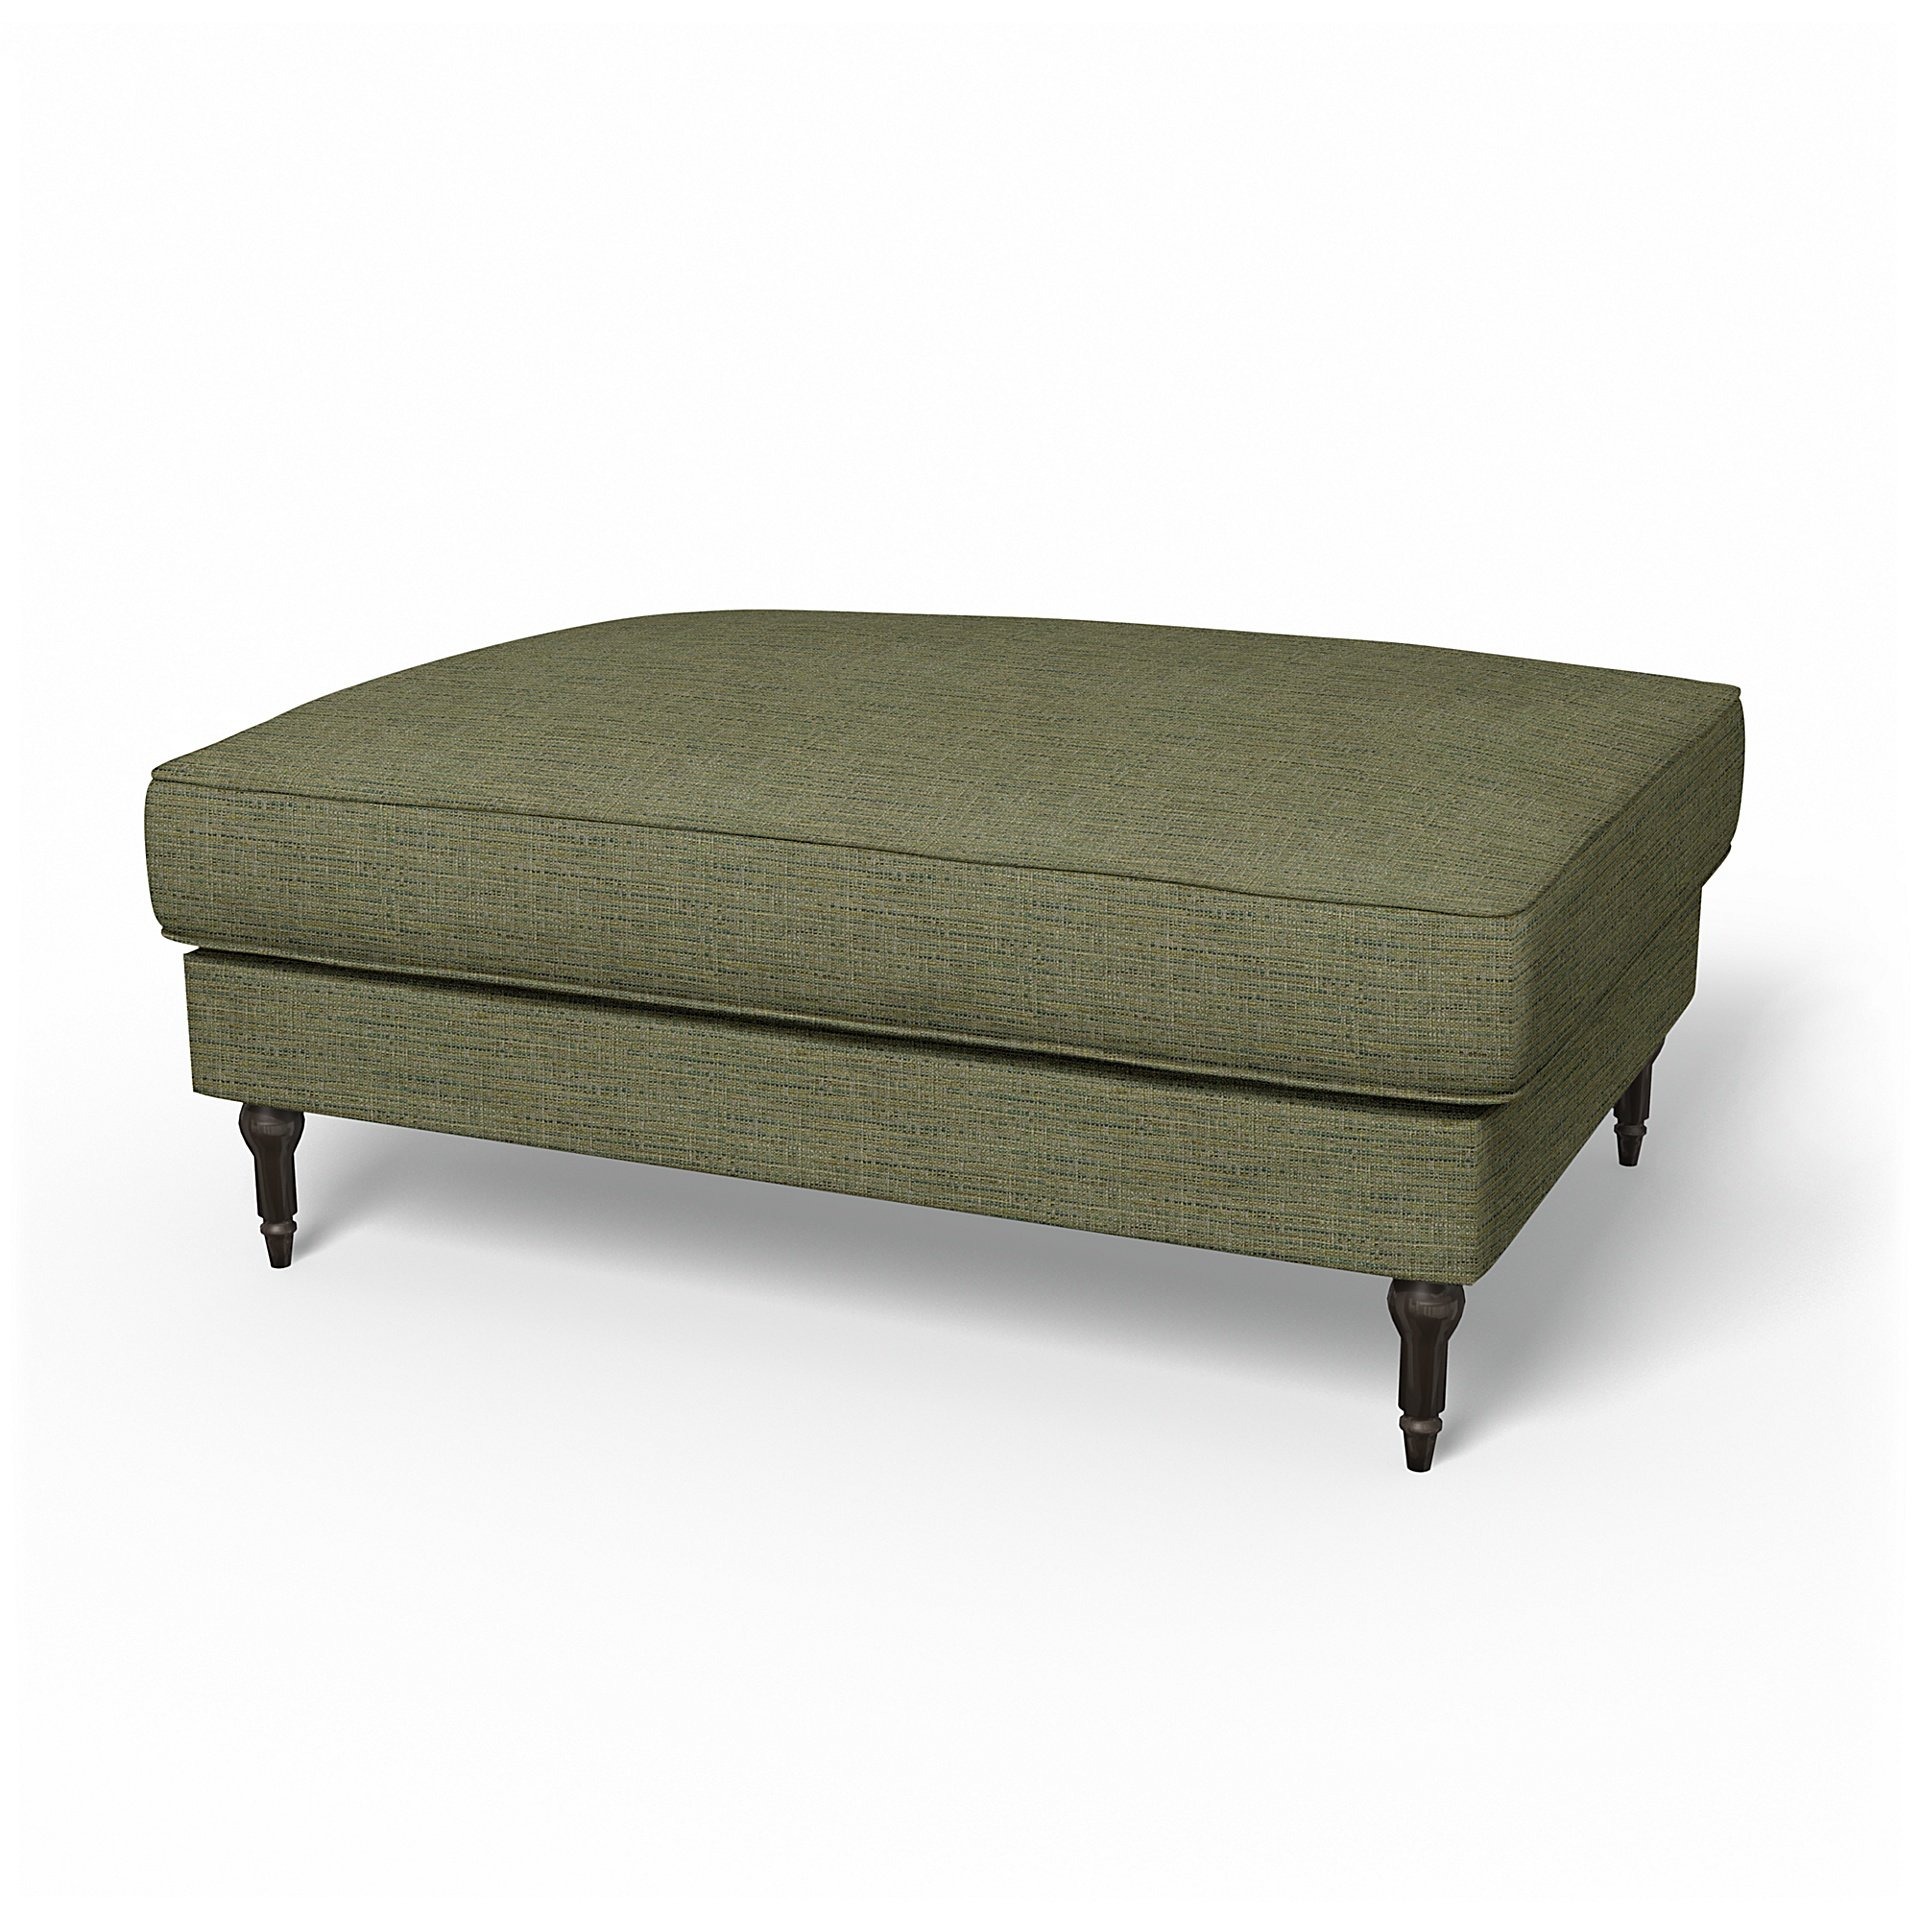 IKEA - Stocksund Footstool Cover, Meadow Green, Boucle & Texture - Bemz